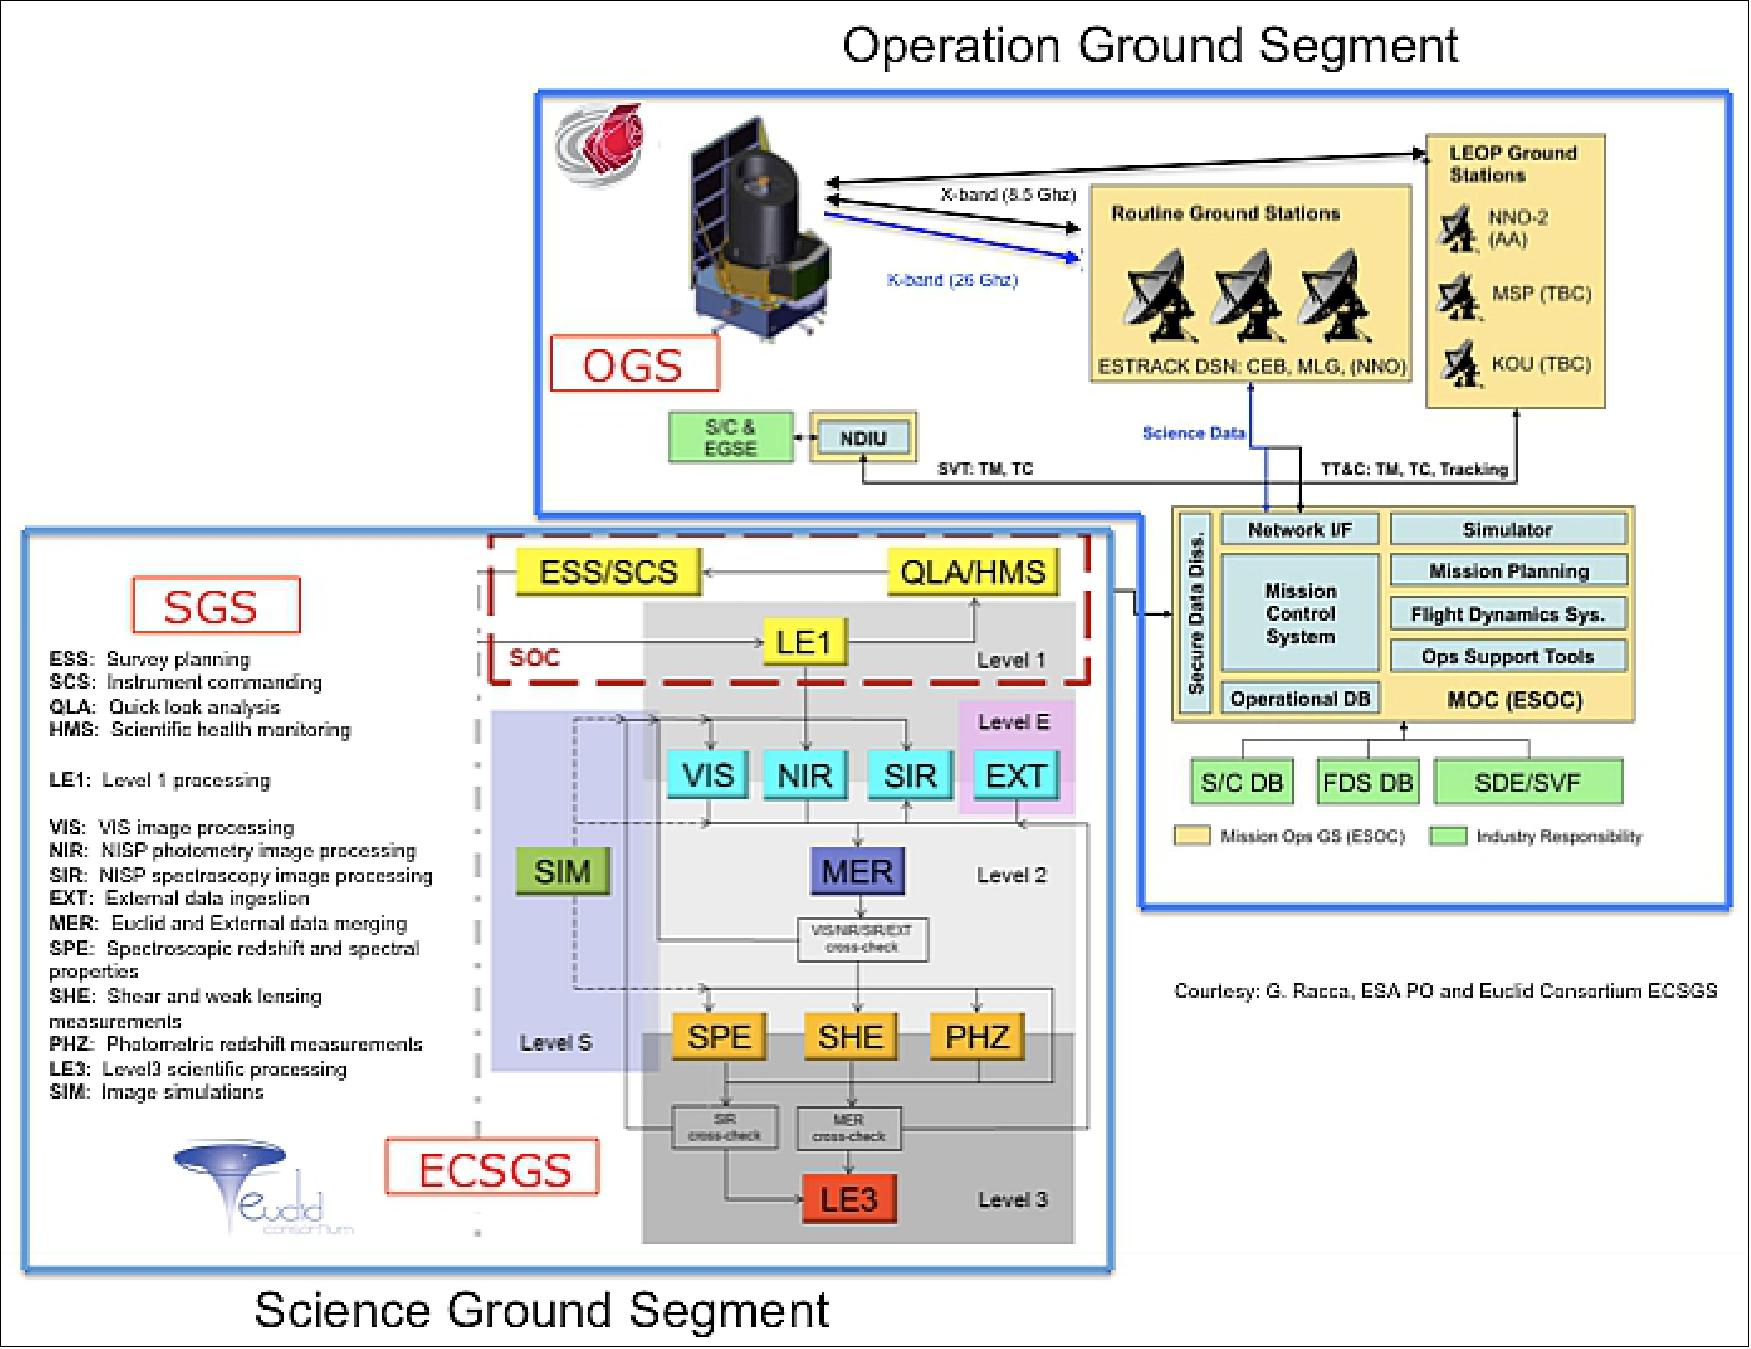 Figure 60: Overview of the 2 elements of the Ground Segment and its main components, the Operation Ground Segment (OGS) and the Science Ground Segment (SGS). The OGS is under ESA responsibility. The SGS is split into an ESA component and a Euclid Consortium component (ECSGS). VIS, NIS, SIR, EXT, MER, SPE, SHE, PHZ, LE3 and SIM are Euclid Consortium Organization Units in charge of defining and prototyping the algorithms (image credit: Euclid Consortium/ESA/SGS Team)